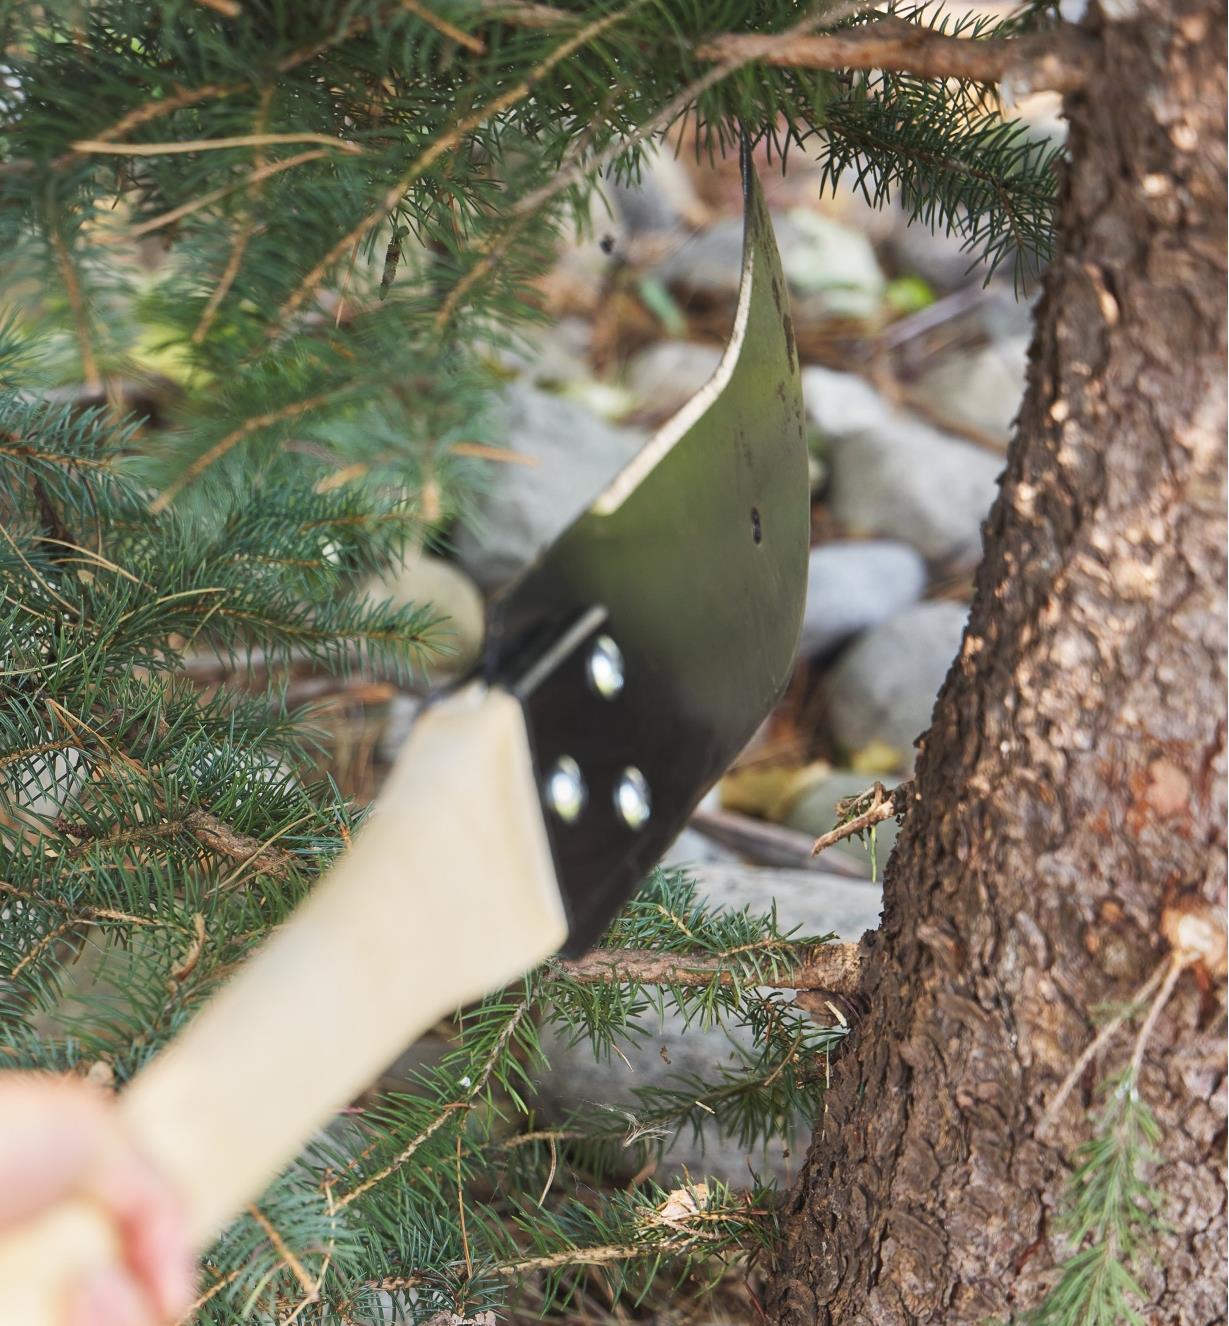 A ditch bank tool being used to limb a tree